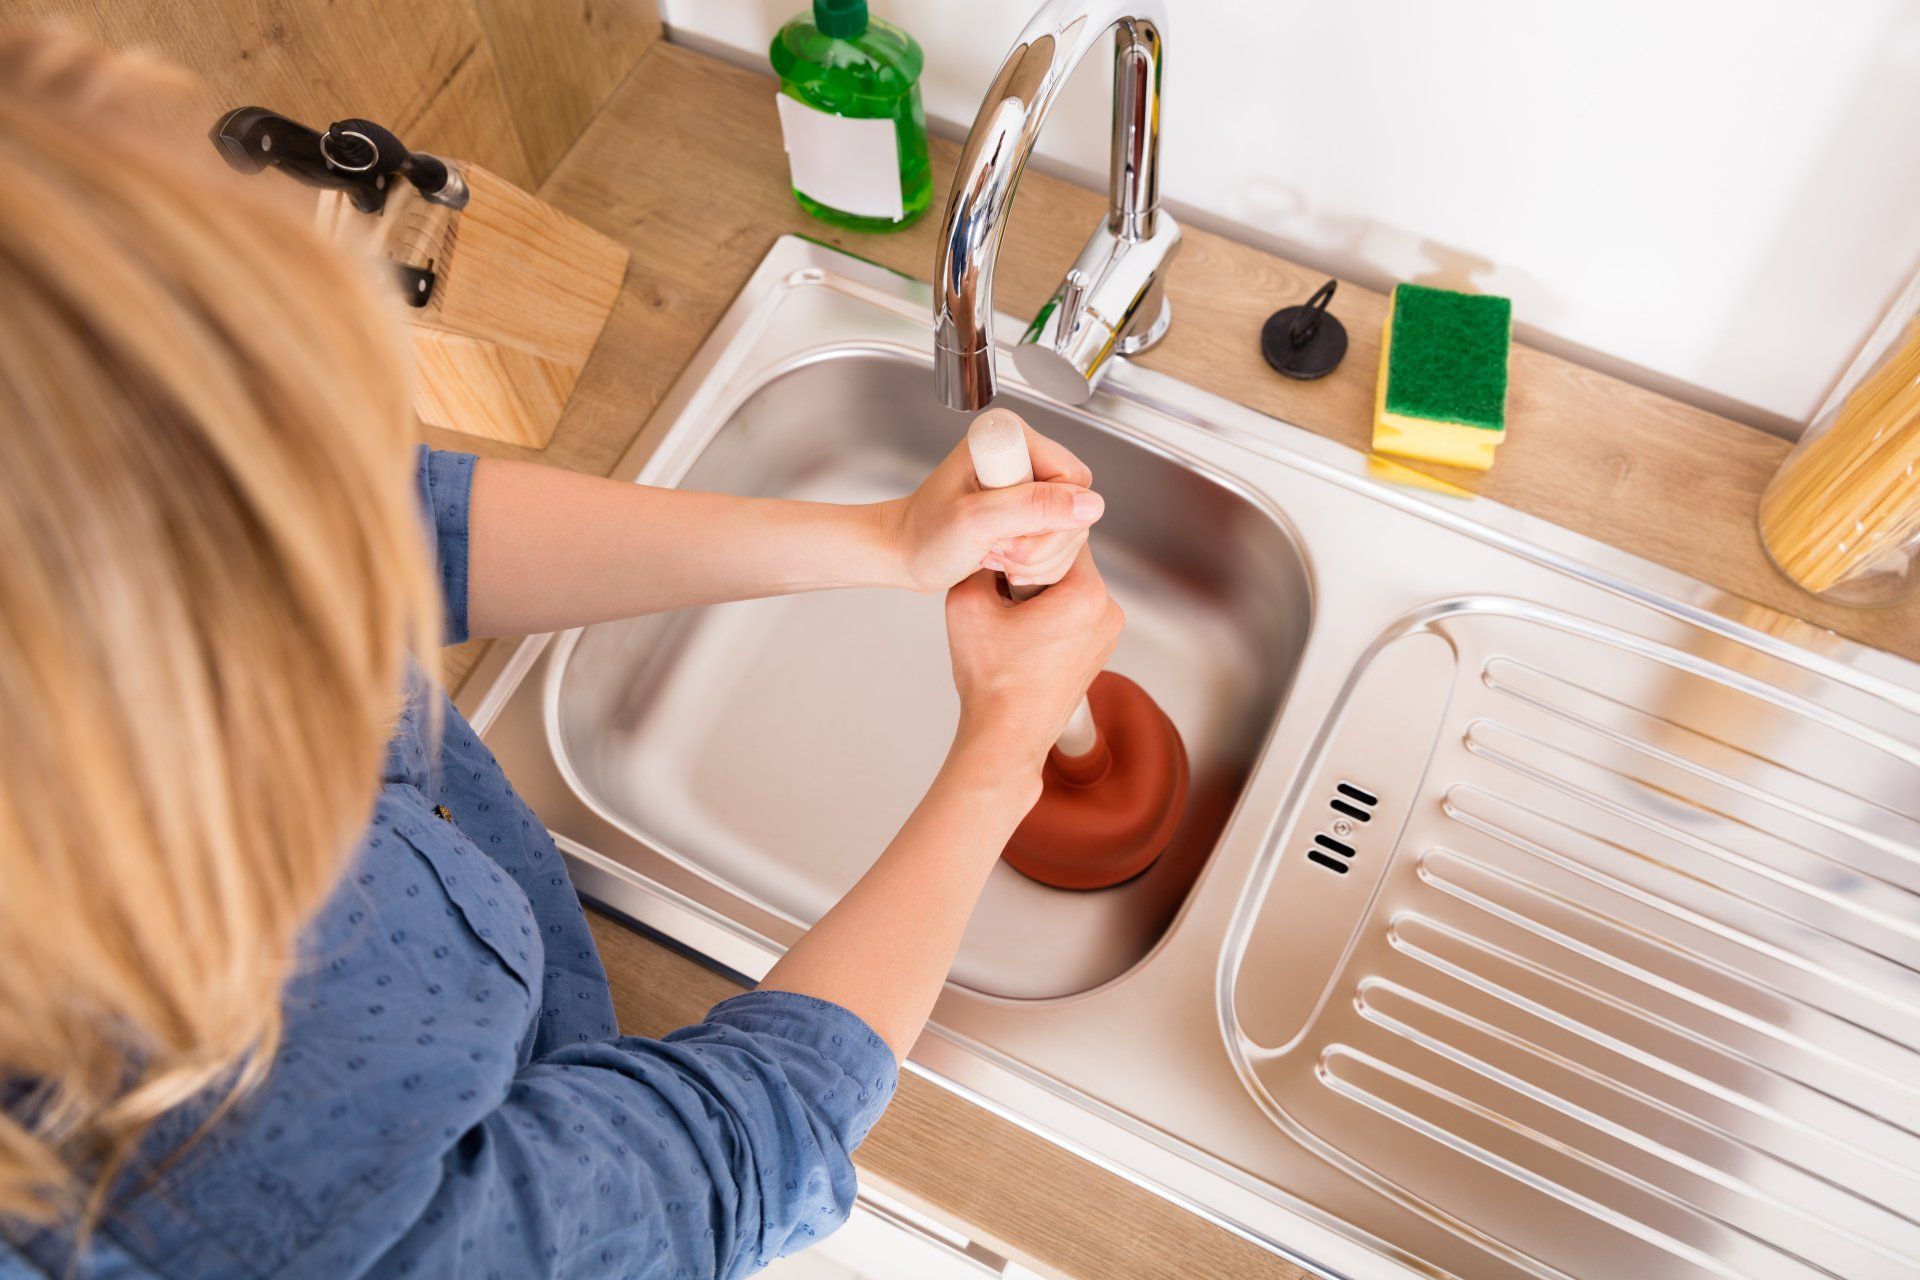 High Angle View Of Woman Using Plunger In Blocked Kitchen Sink To Unclog Drain